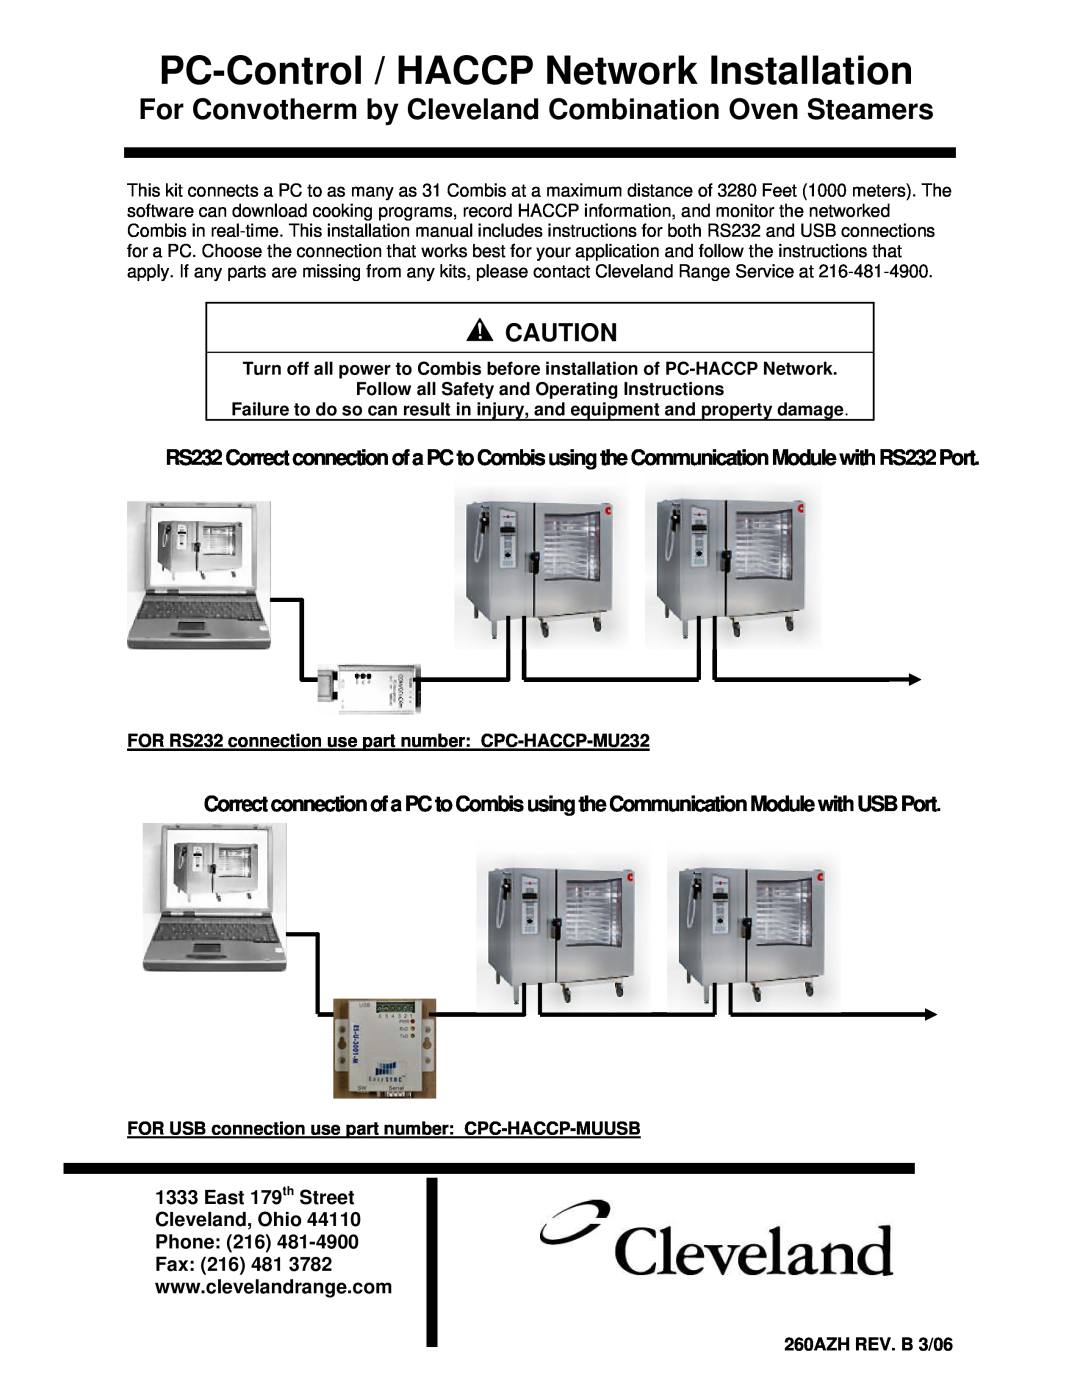 Cleveland Range Steam Oven installation manual Turn off all power to Combis before installation of PC-HACCP Network 